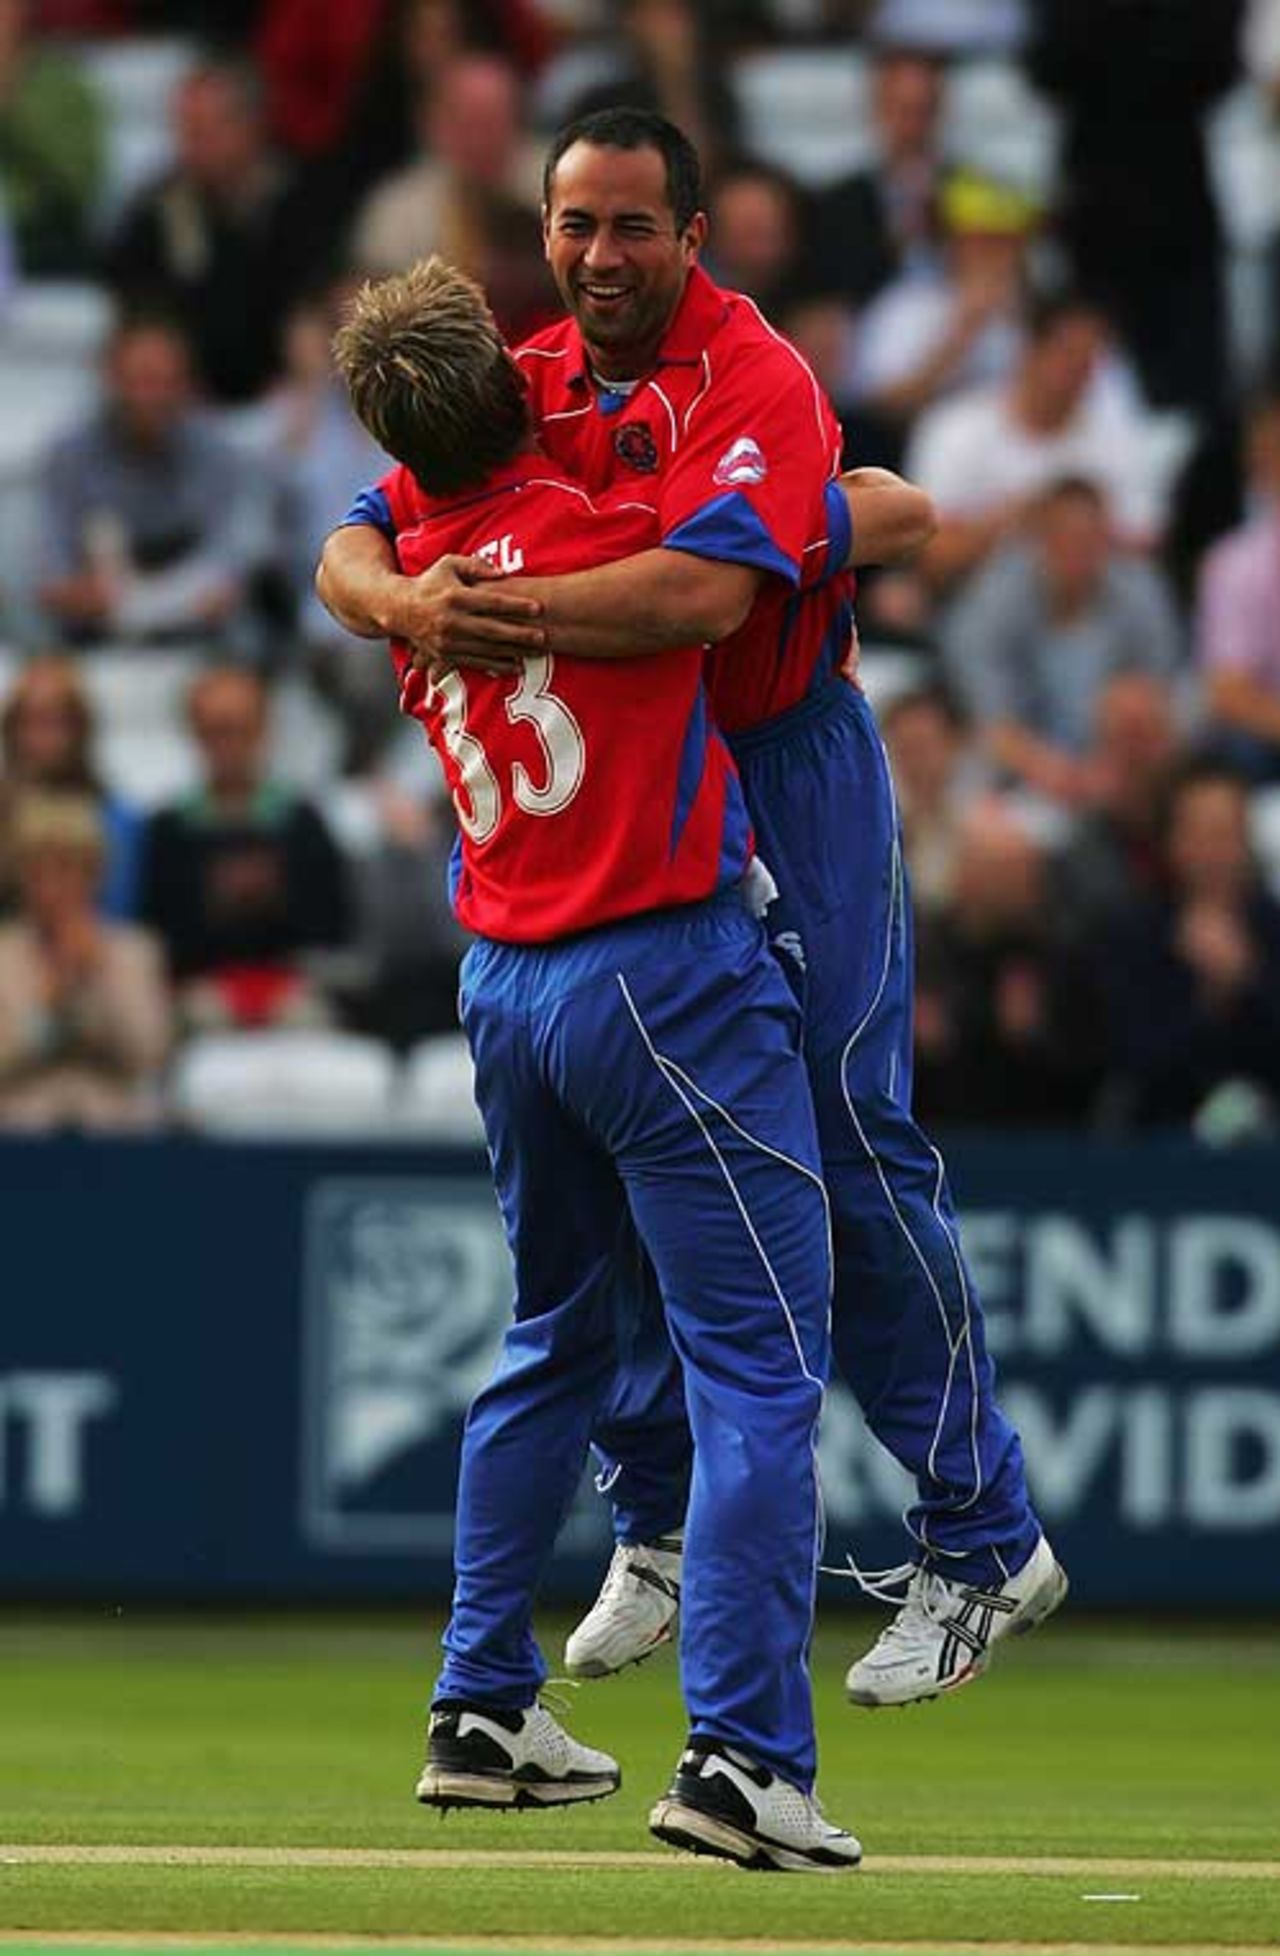 Essex 's Adam Hollioake and Andy Bichel celebrate the dismissal of Middlesex's Andrew Strauss at Lord's, July 6, 2007